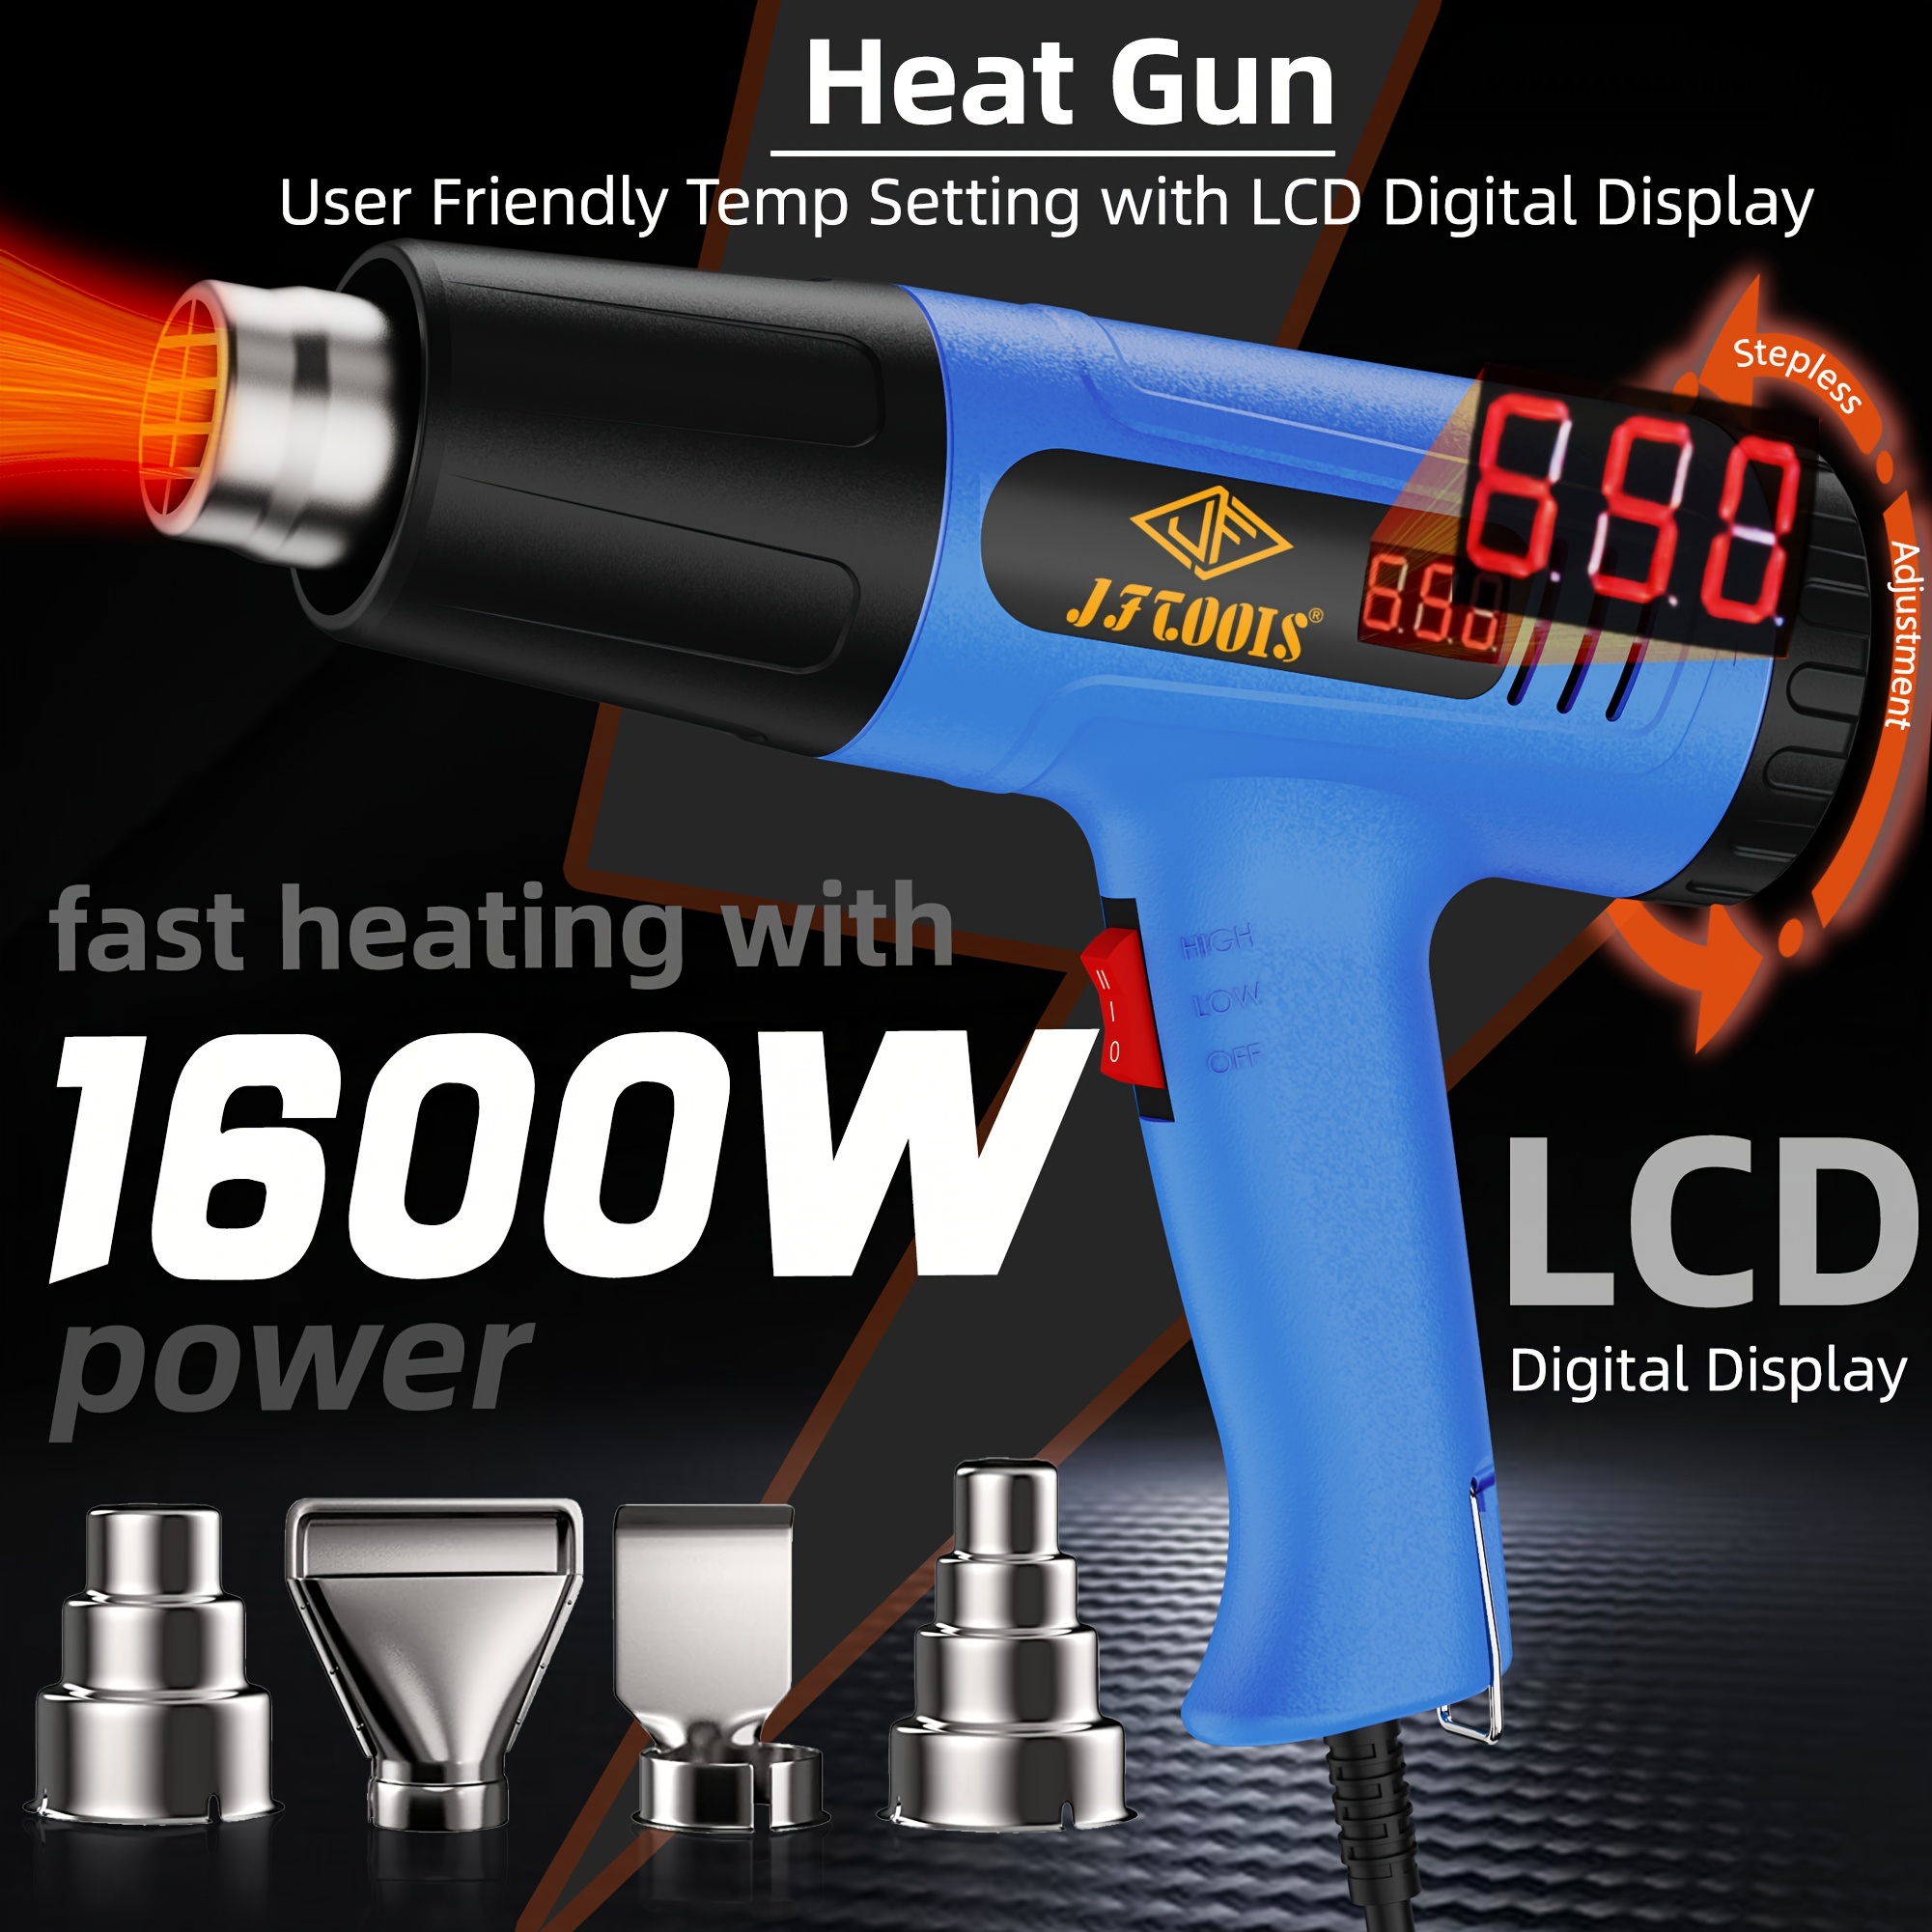 Heat Shrink Gun With High and Low Settings